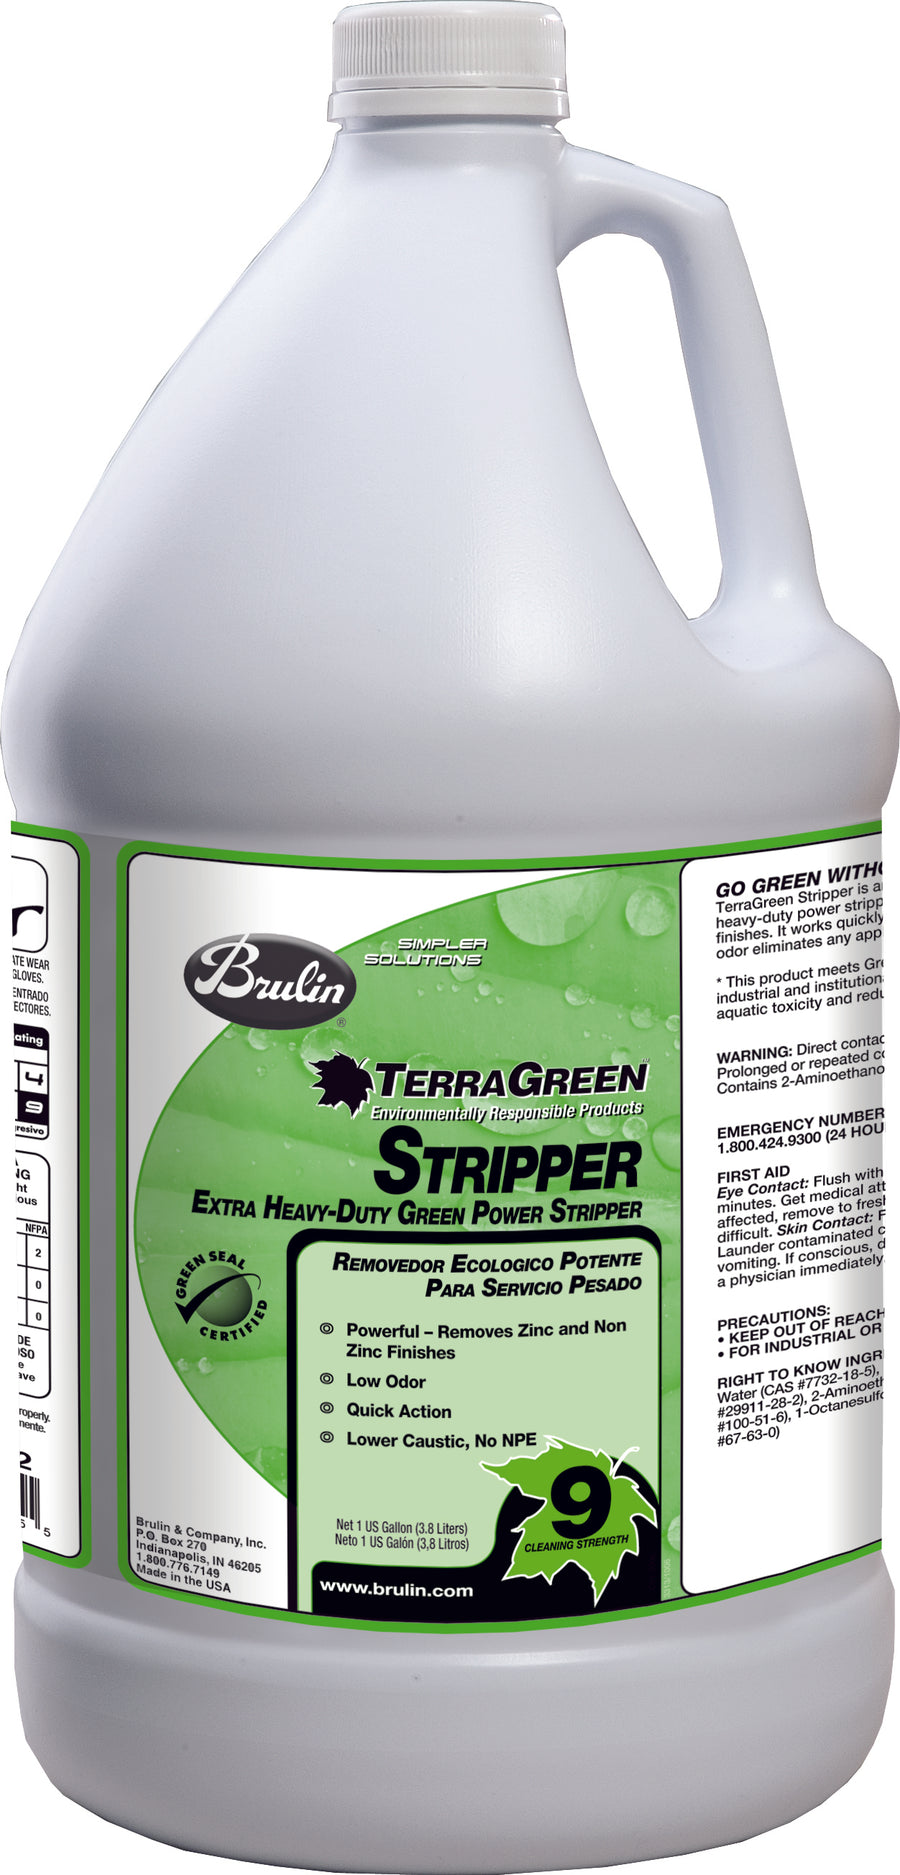 TerraGreen Power Floor Stripper – Green Seal Certified, powerful floor stripping solution in a case of four gallons. Low pH, low odor, and efficient.